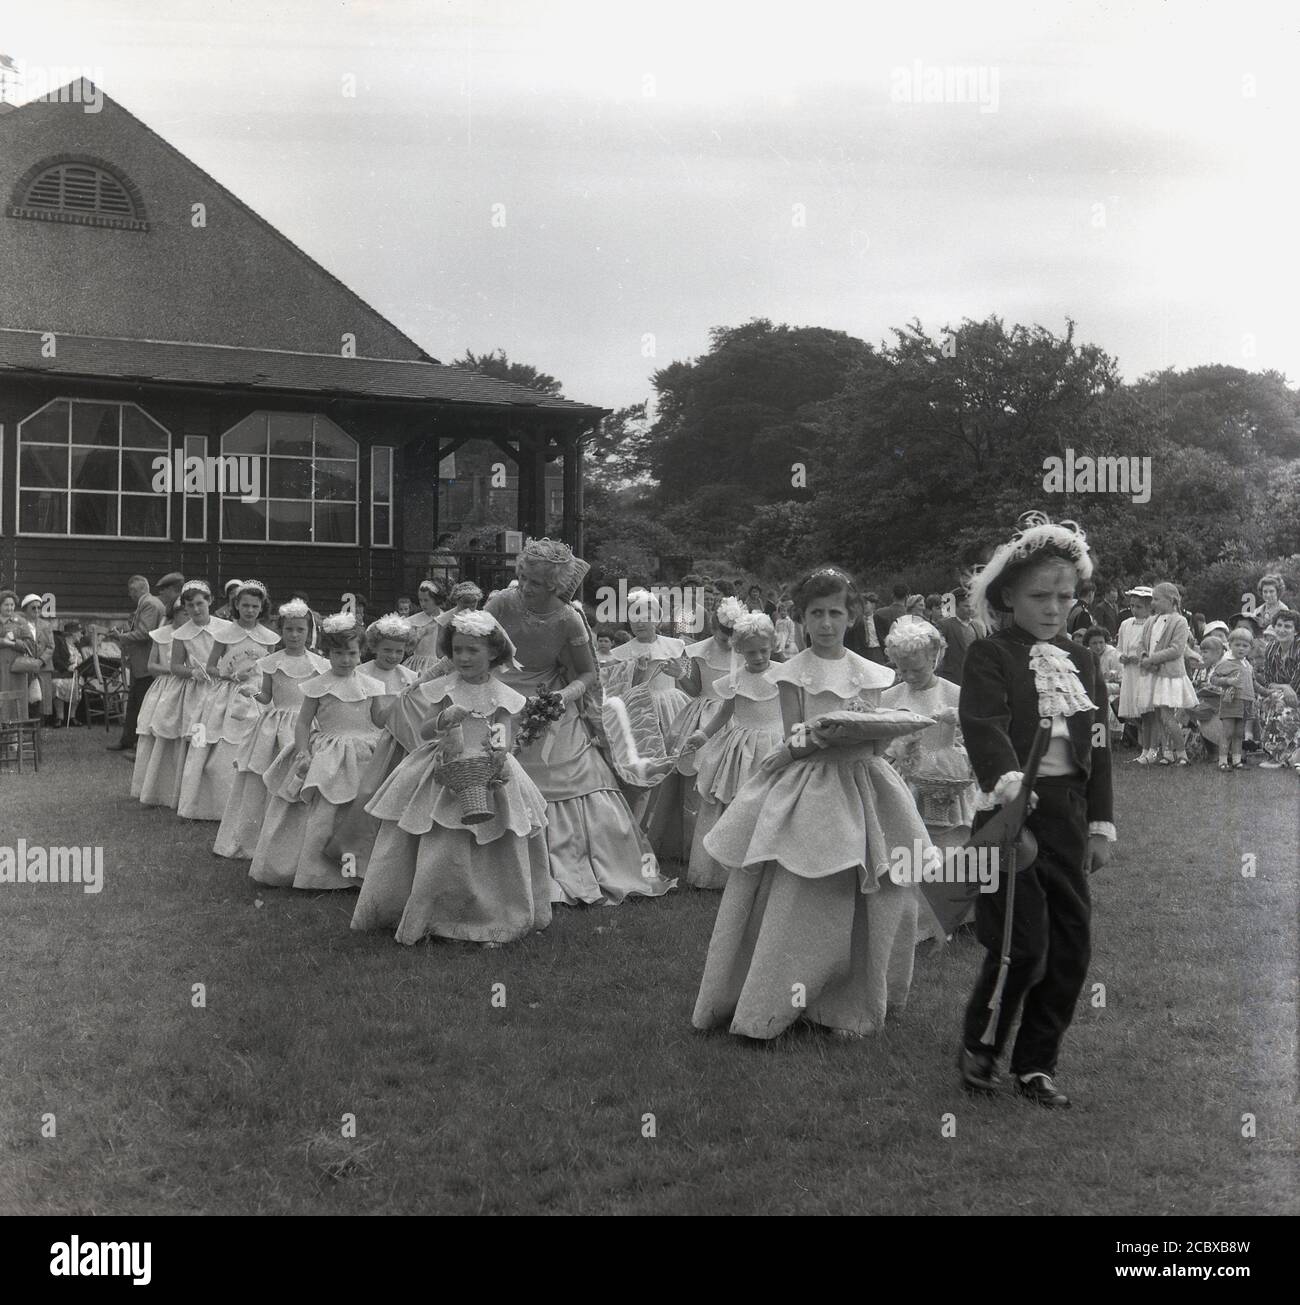 1950s, historical, a young boy dressed in a regency costume with lace cravat leading the 'Rose Queen' and her entourage of young girls, as they walk through the local park, Farnworth, Lancashire, England, UK. Dating back to the 1880s, the annual Rose Queen festival was traditionally held in the month of June, becoming annual event in many towns and villages across the UK, especially in the county of Lancashire, known as the Red Rose county, following the Wars of the Roses (1455-87). Stock Photo